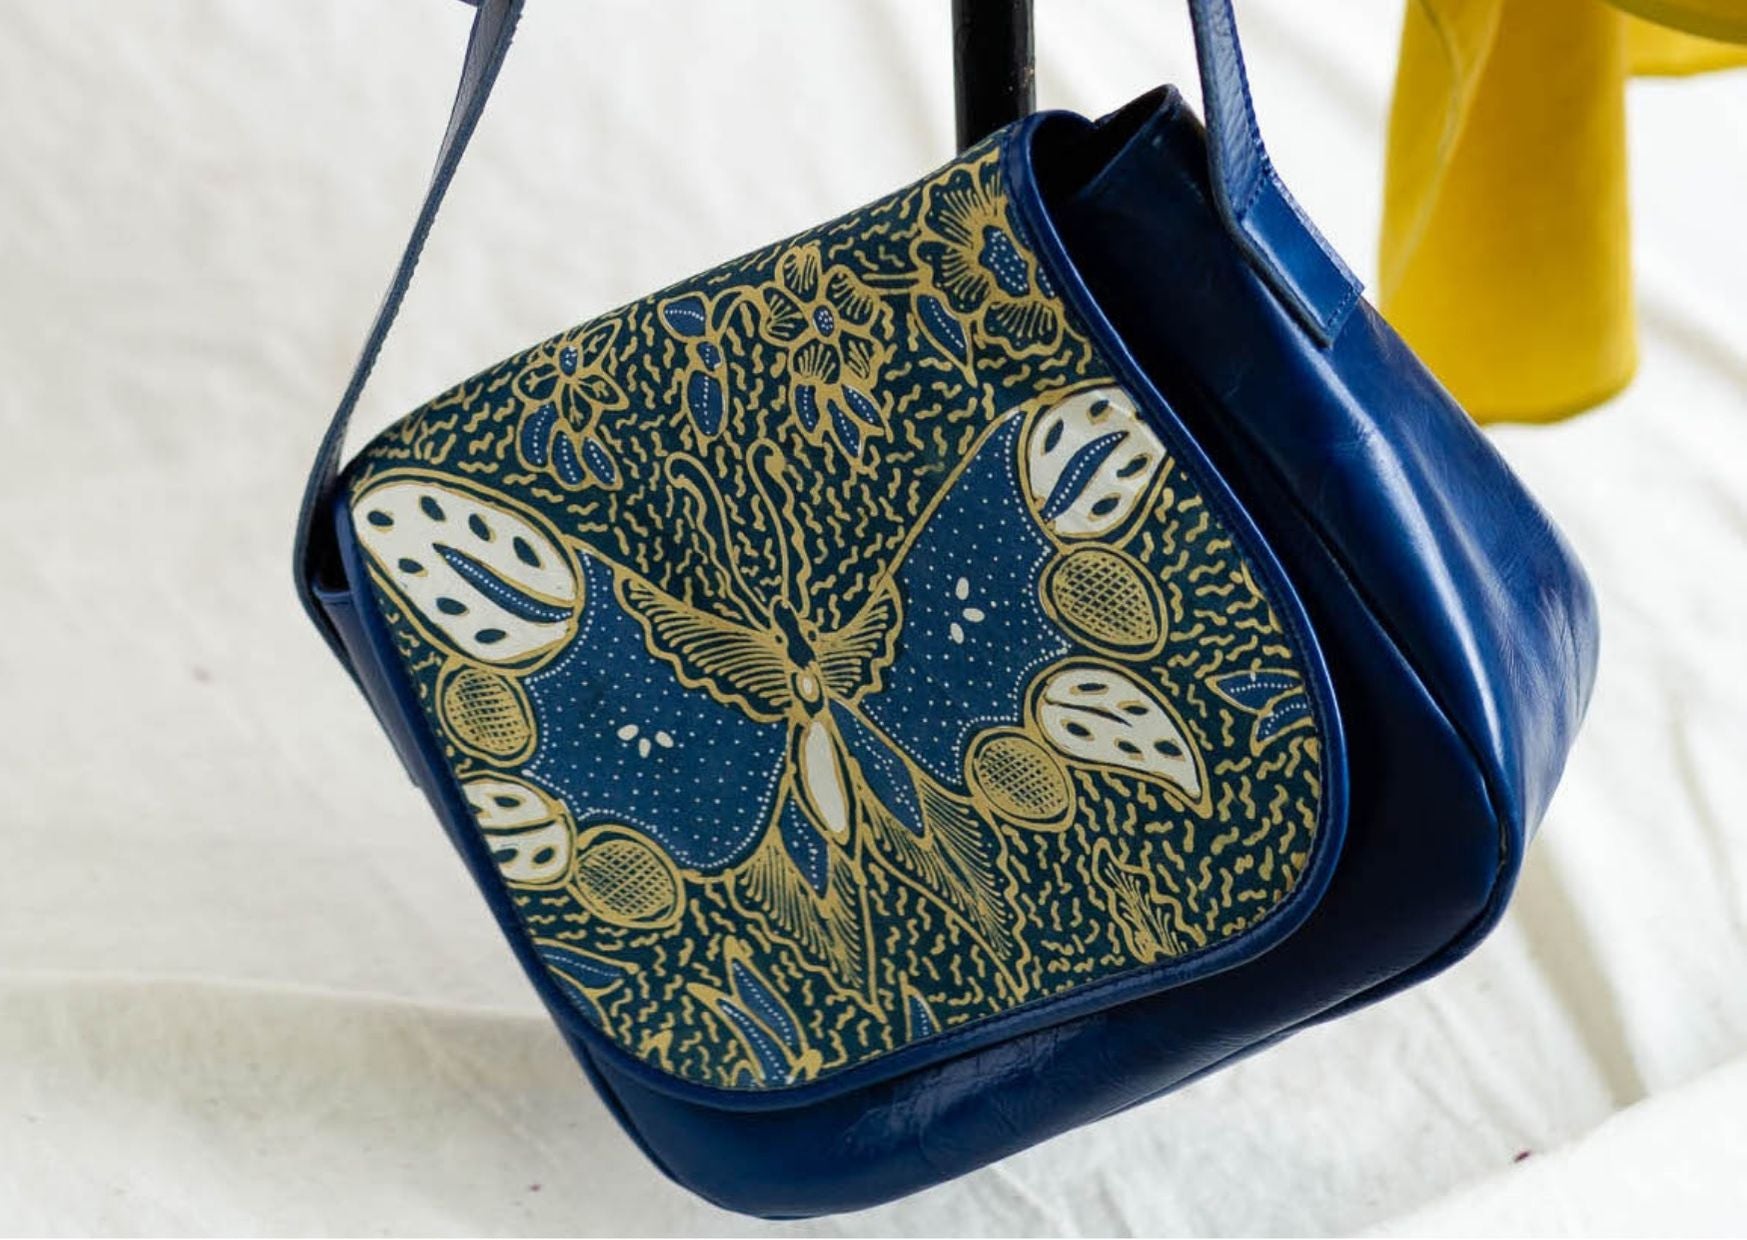 Butterfly Batik Bag Singapore by Sustainable fashion brand Gypsied